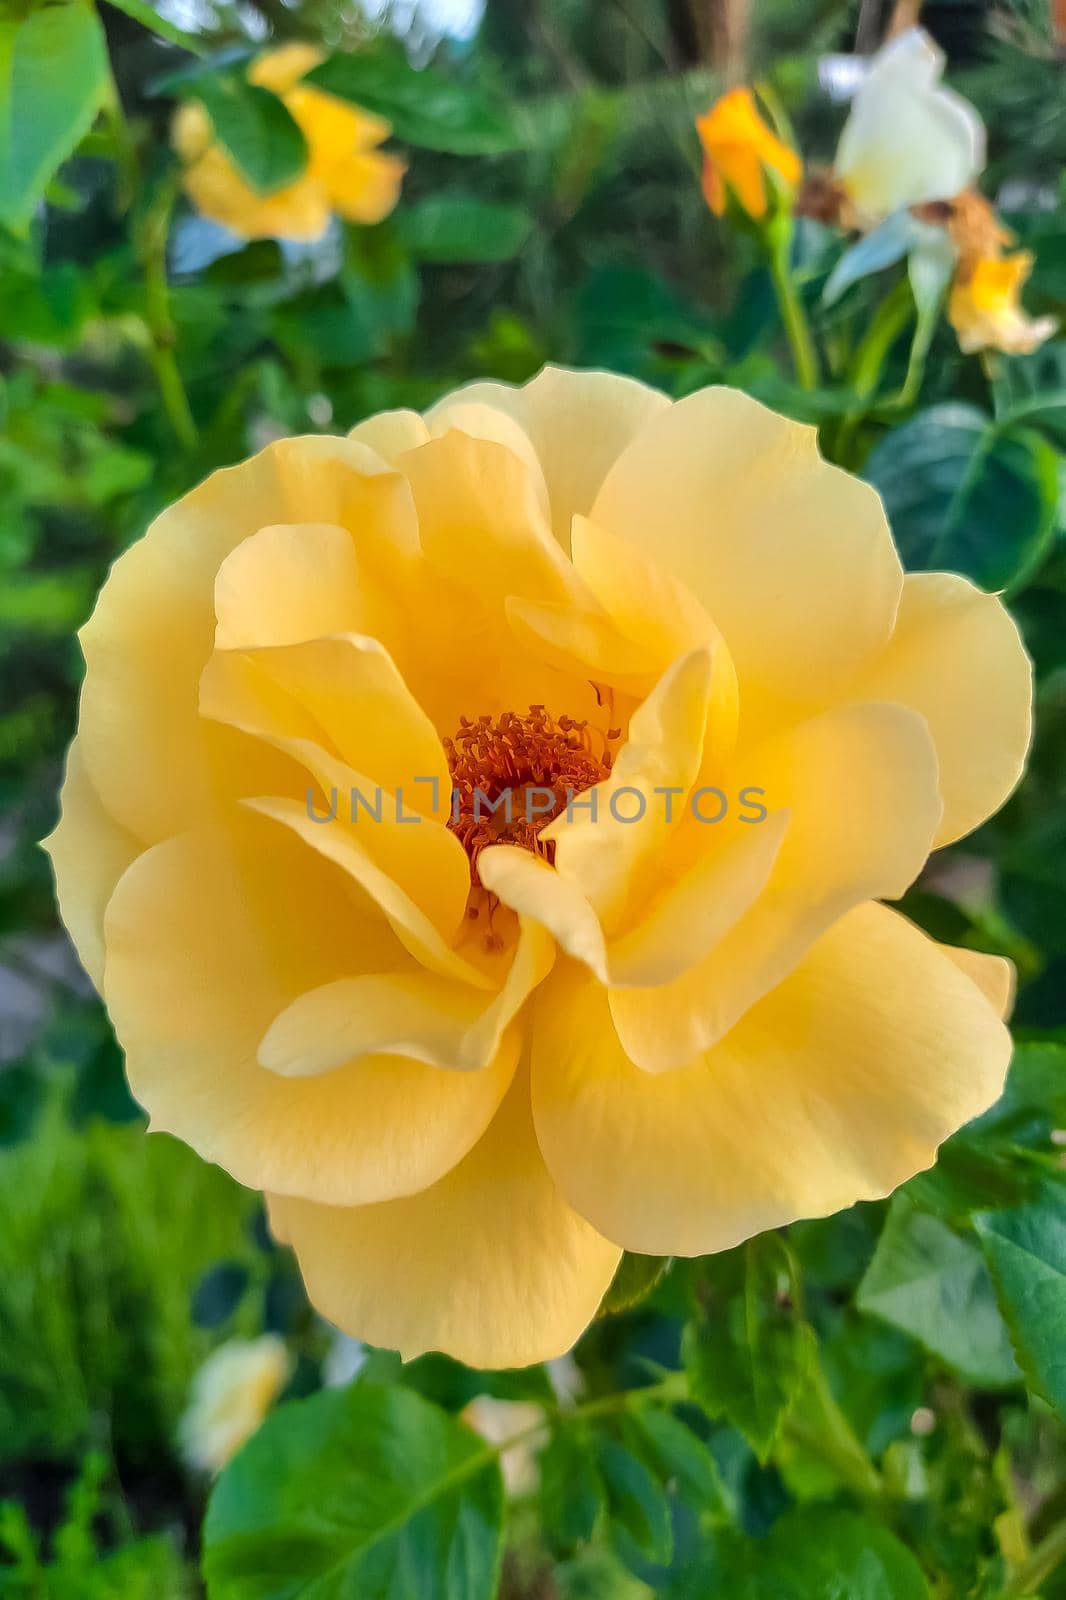 View of a beautiful orange rose flower in the garden